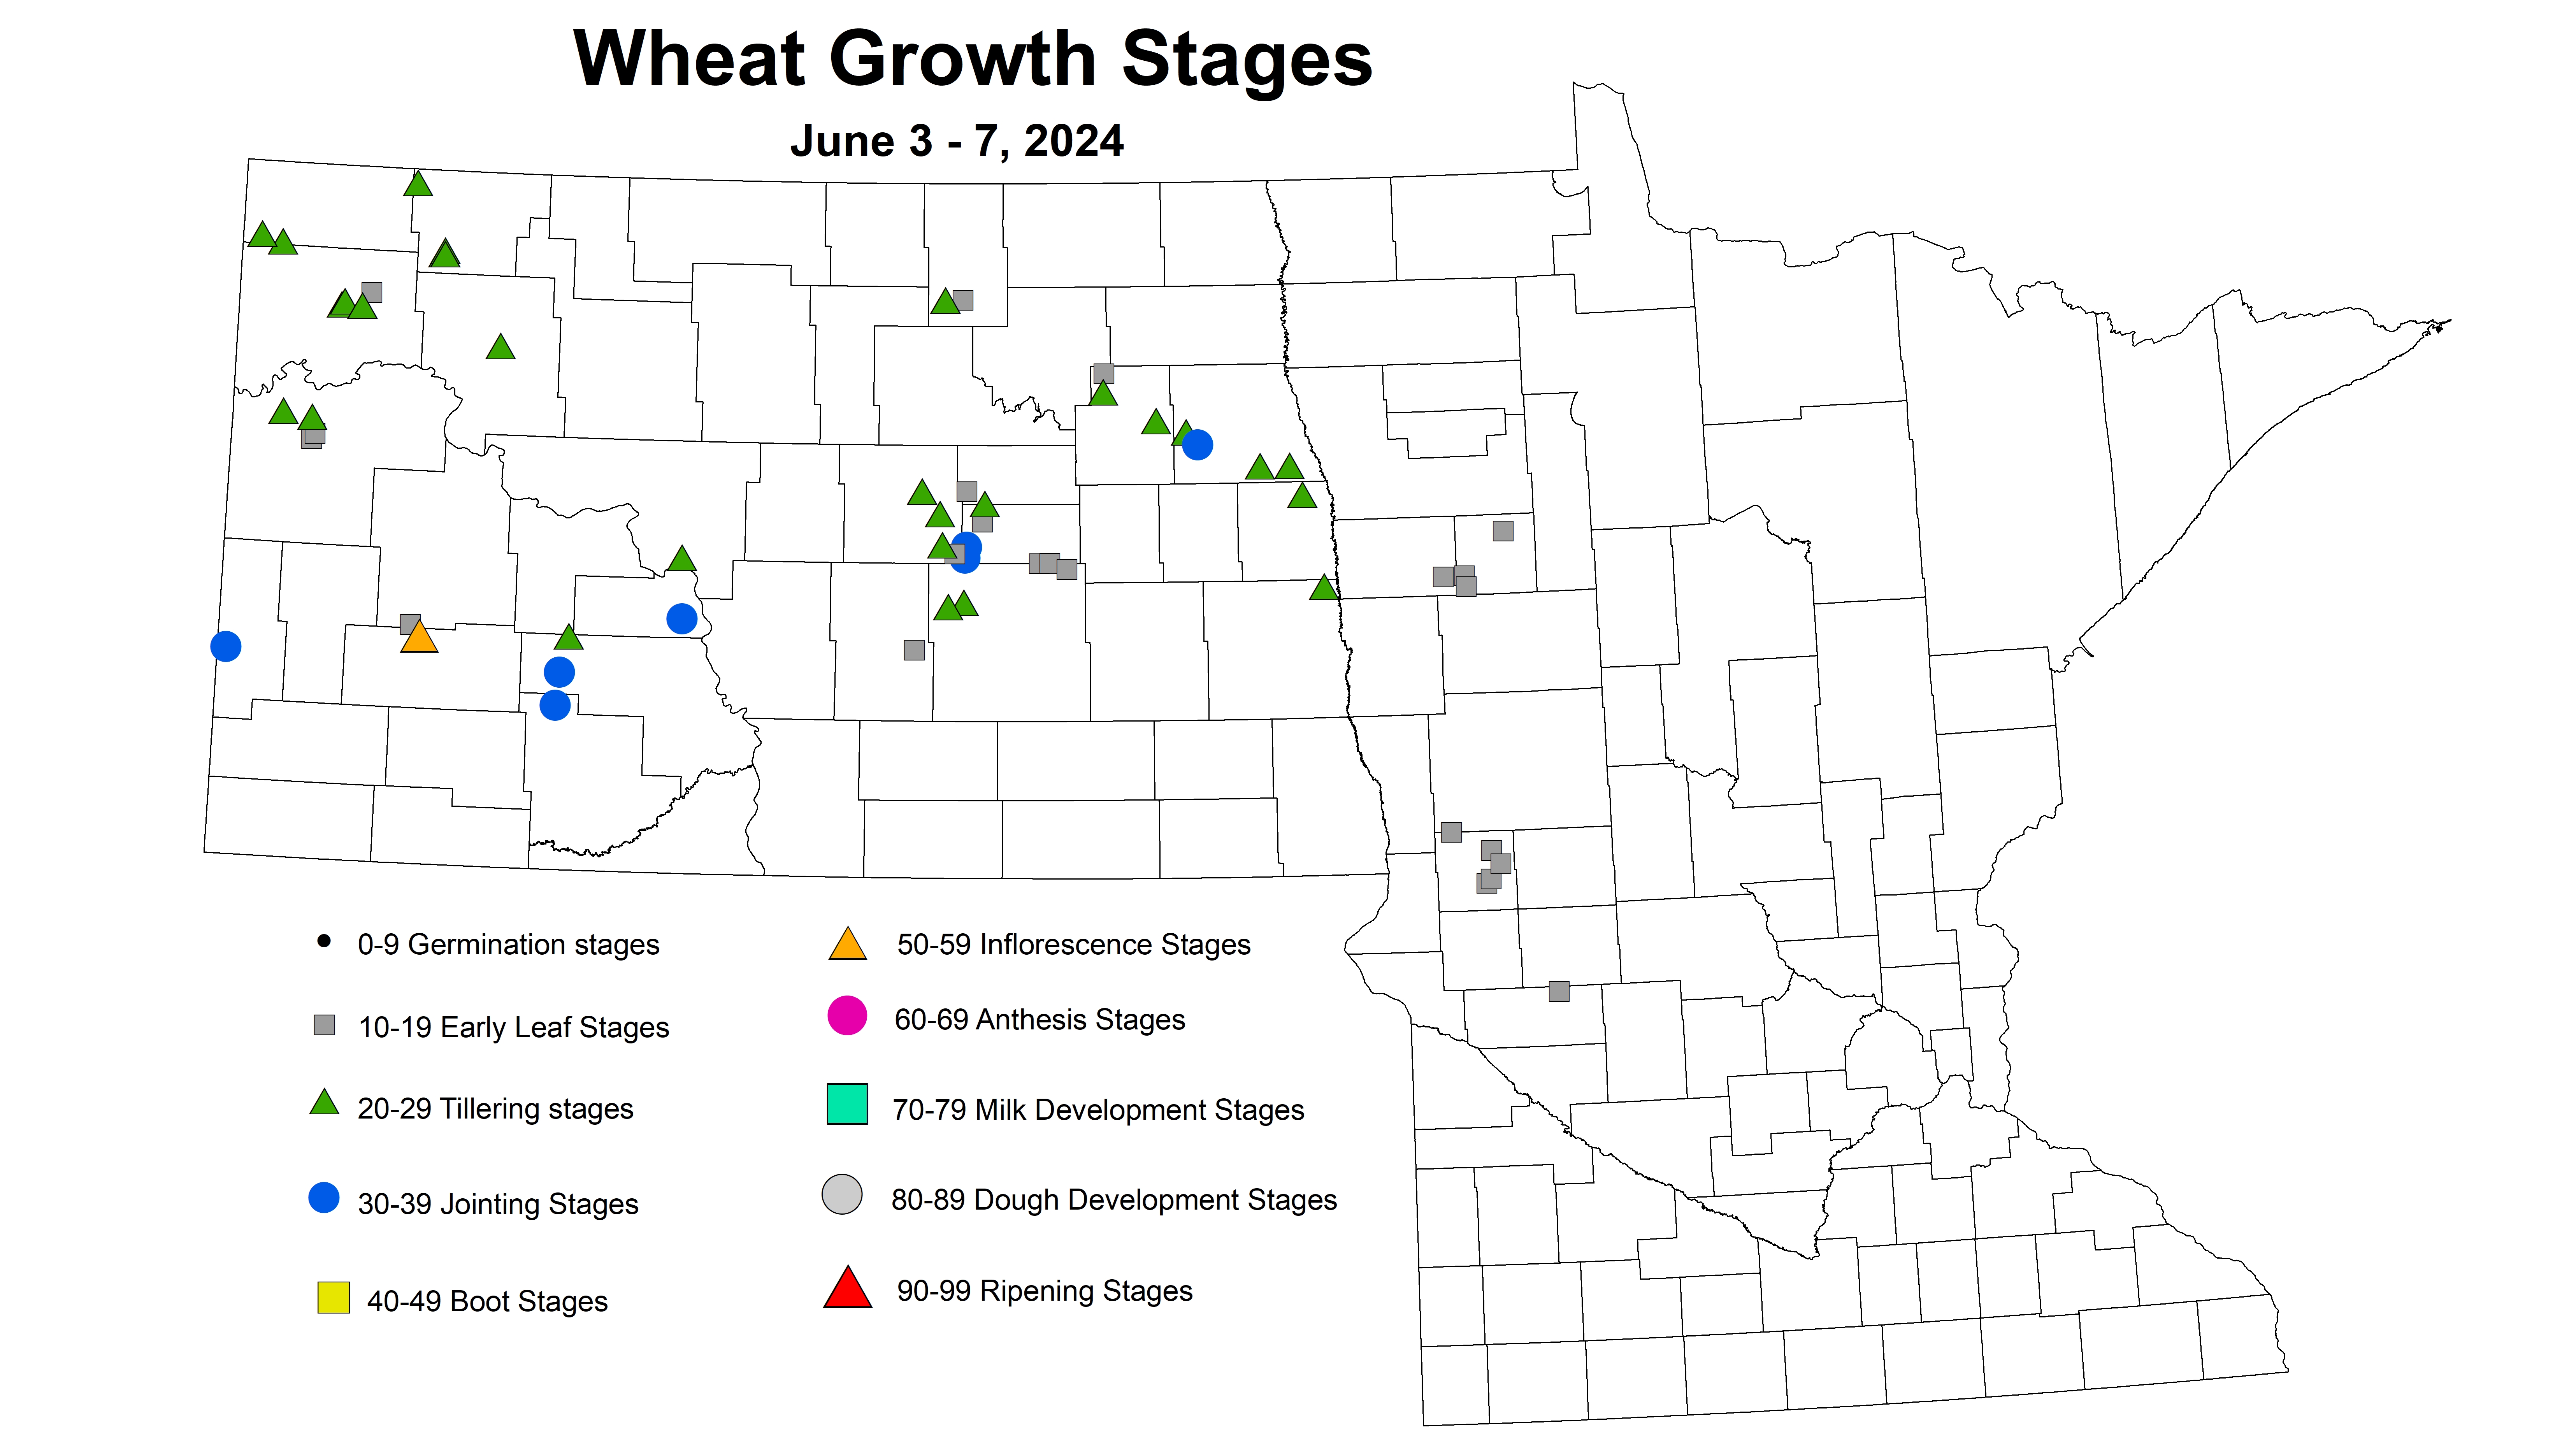 wheat growth stages 2024 6.3-6.7